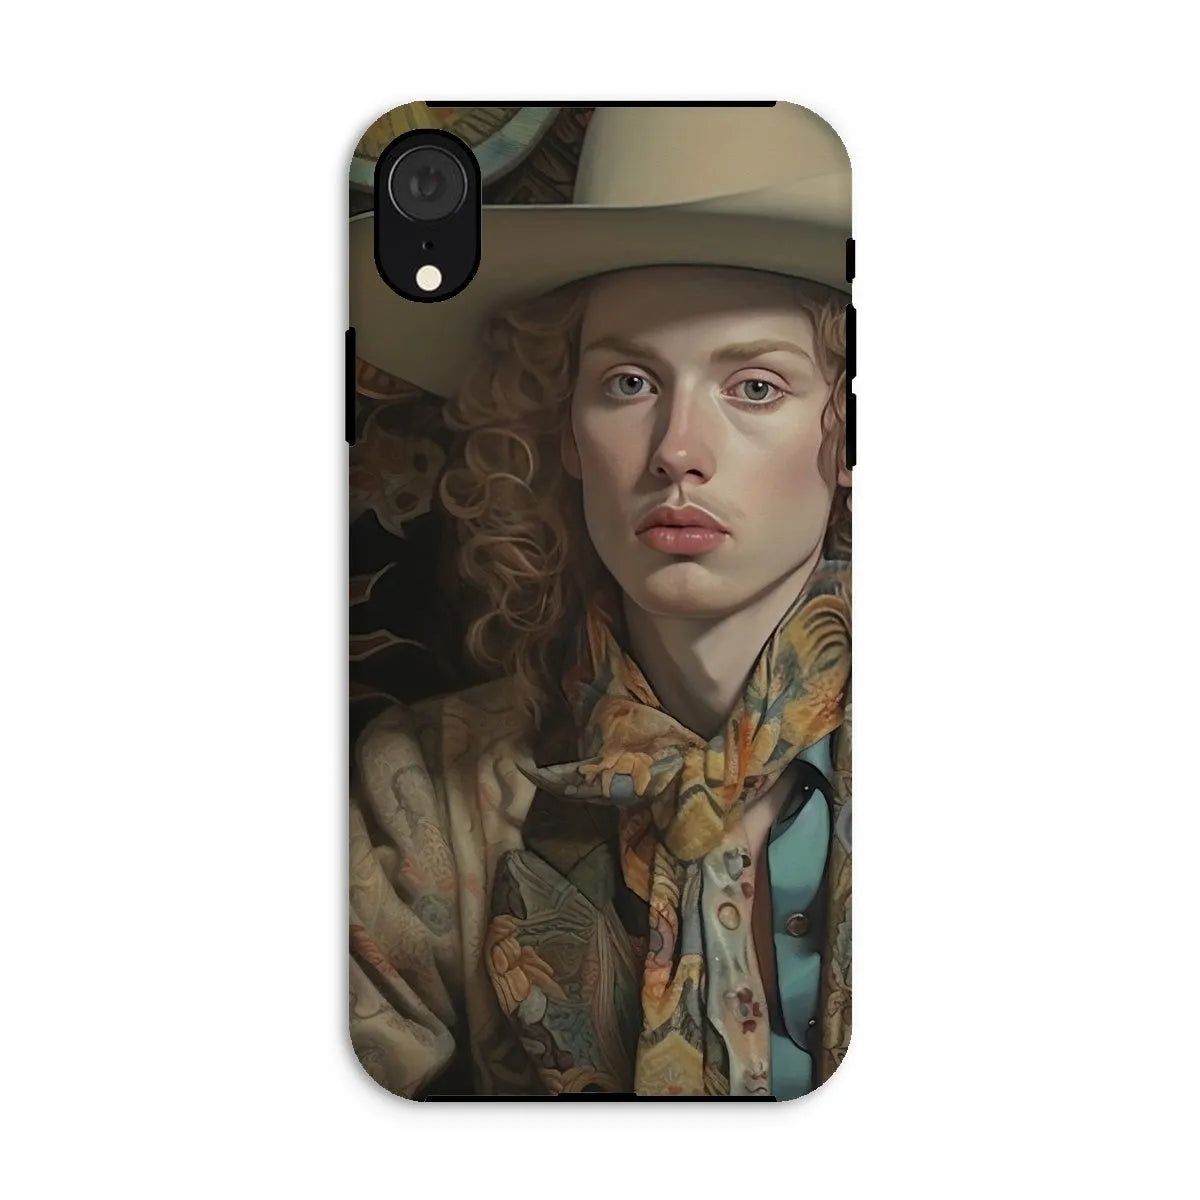 Ollie The Transgender Cowboy - F2m Dandy Outlaw Phone Case - Iphone Xr / Matte - Mobile Phone Cases - Aesthetic Art